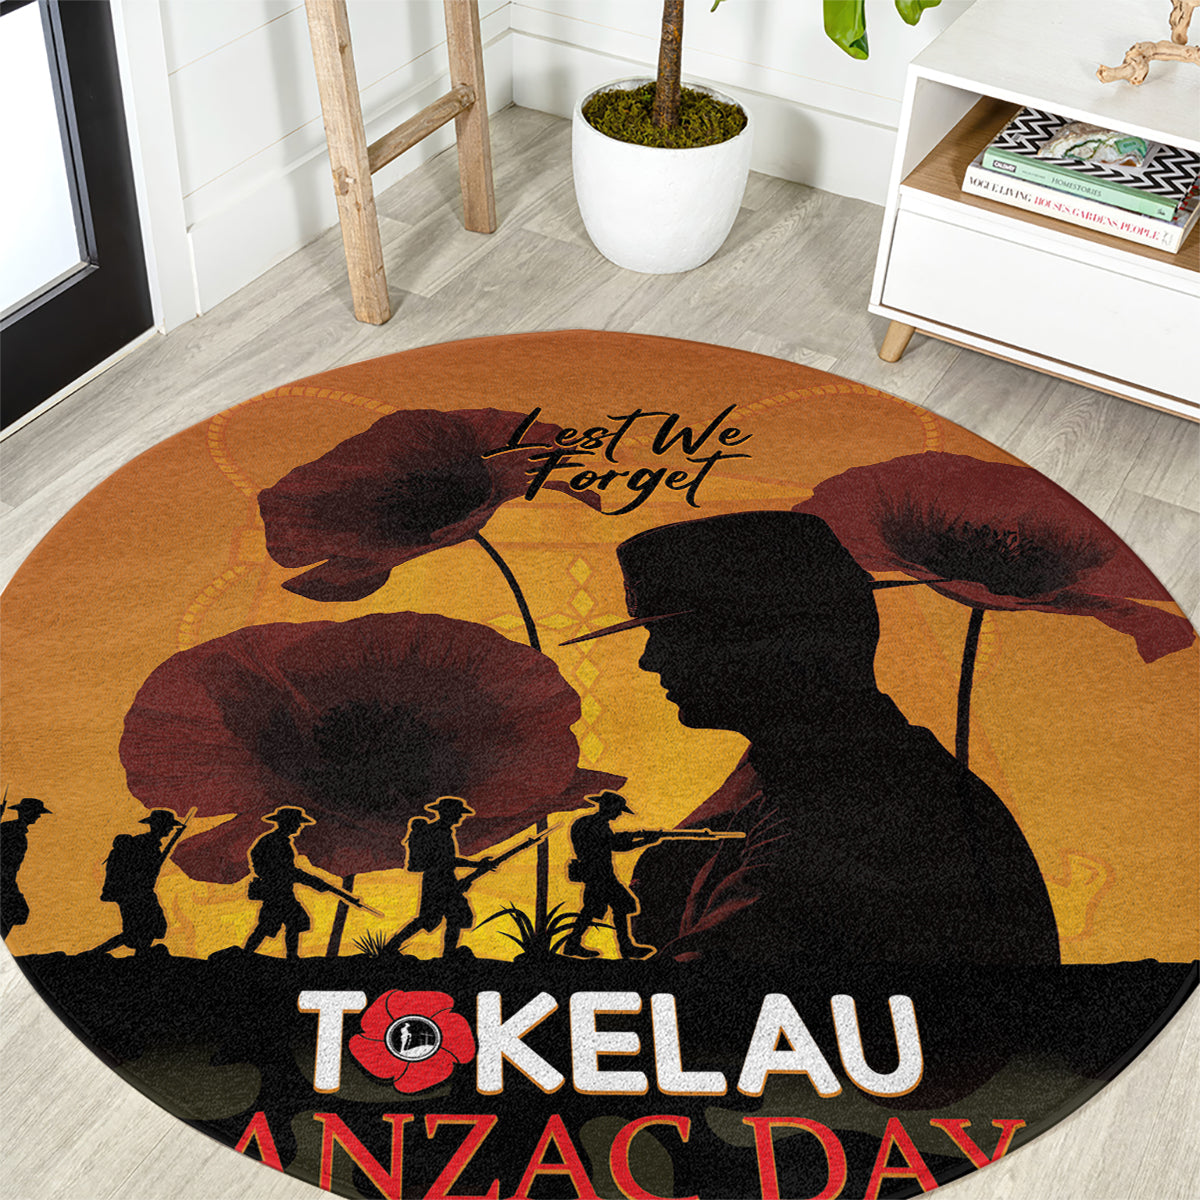 Tokelau ANZAC Day Round Carpet Camouflage With Poppies Lest We Forget LT14 Yellow - Polynesian Pride